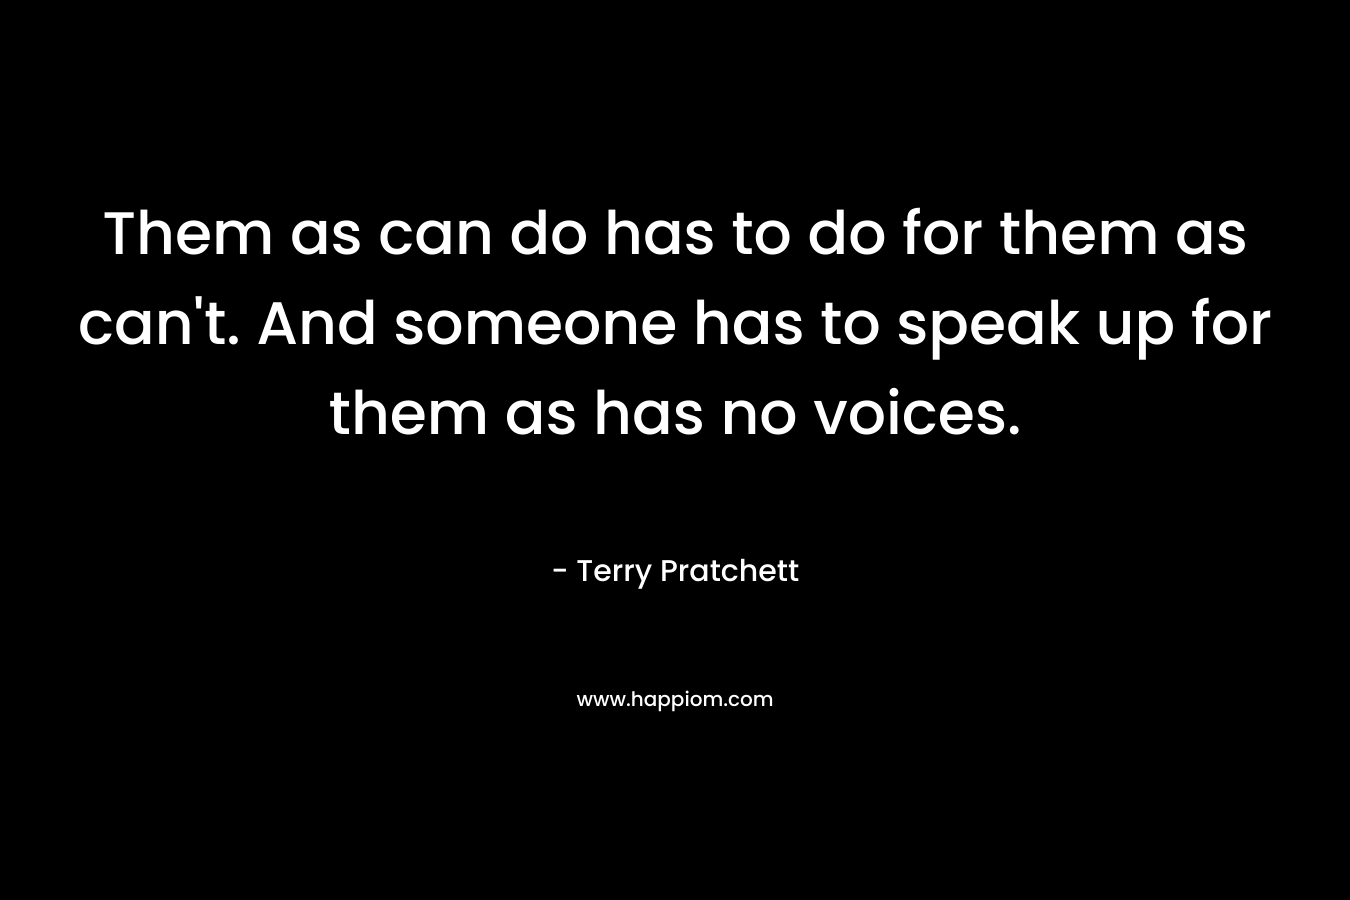 Them as can do has to do for them as can’t. And someone has to speak up for them as has no voices. – Terry Pratchett